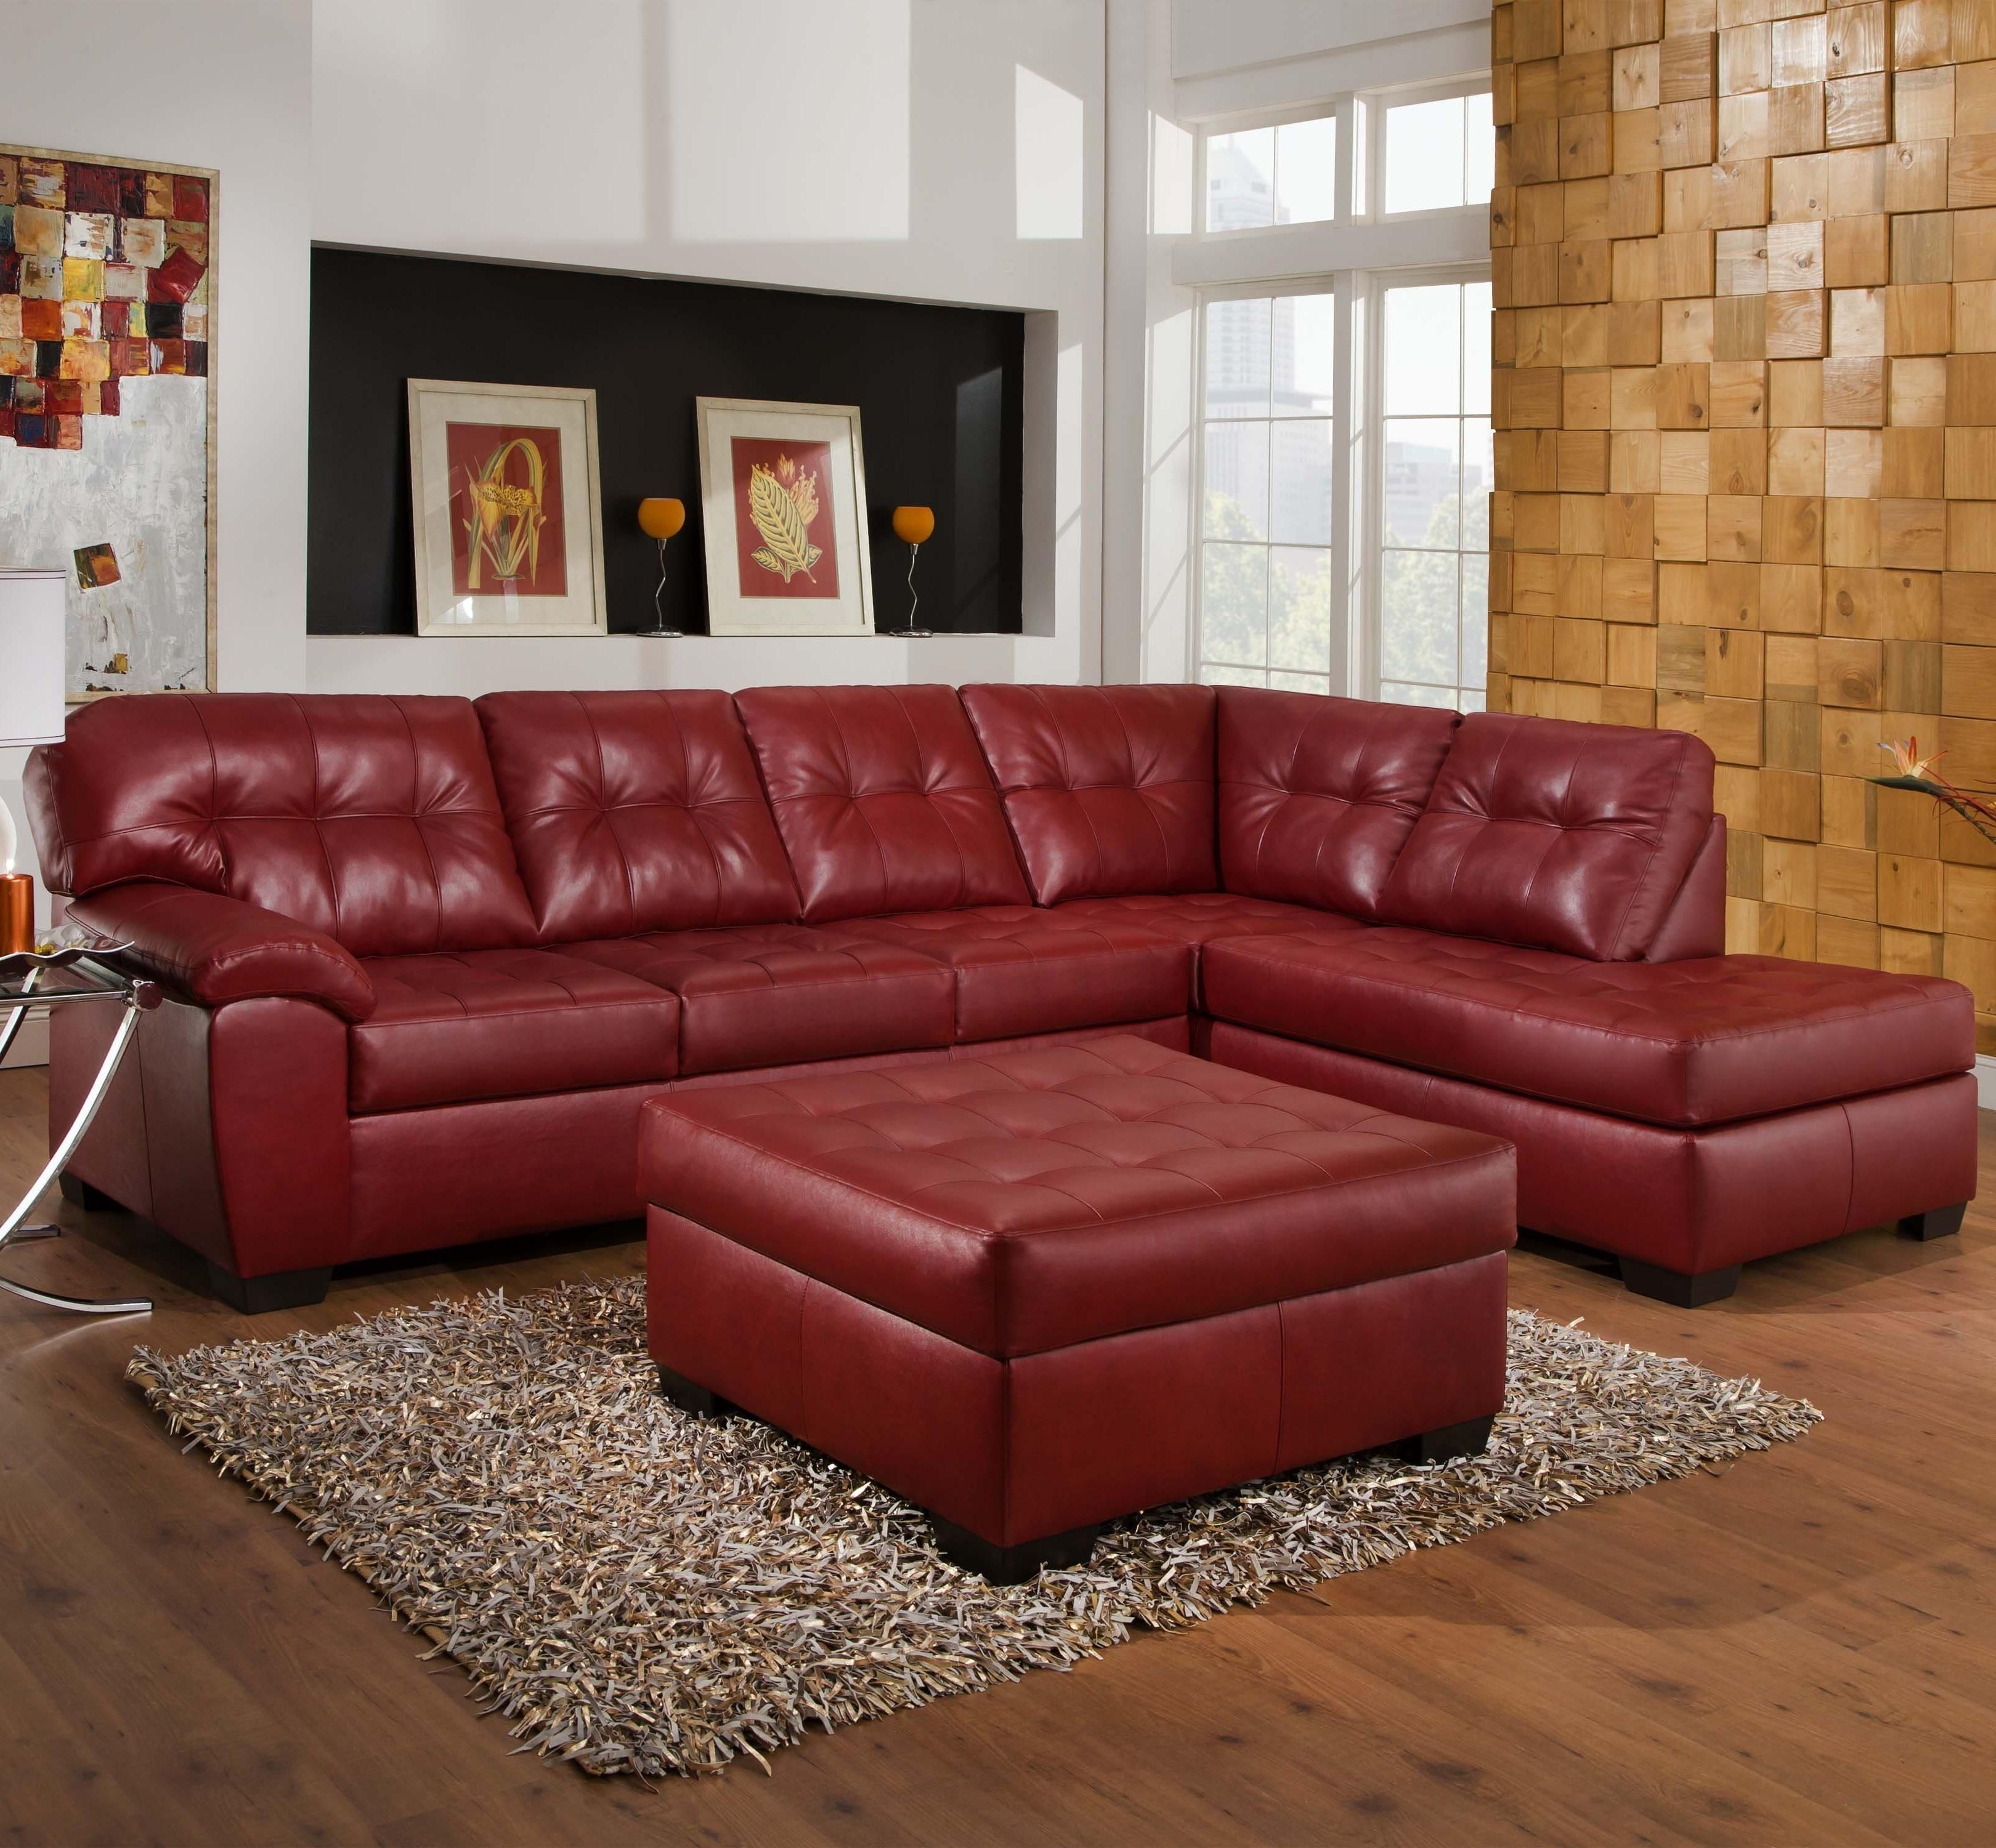 9569 2 Piece Sectional With Tufted Seats & Backsimmons With Regard To Memphis Tn Sectional Sofas (Photo 8 of 10)